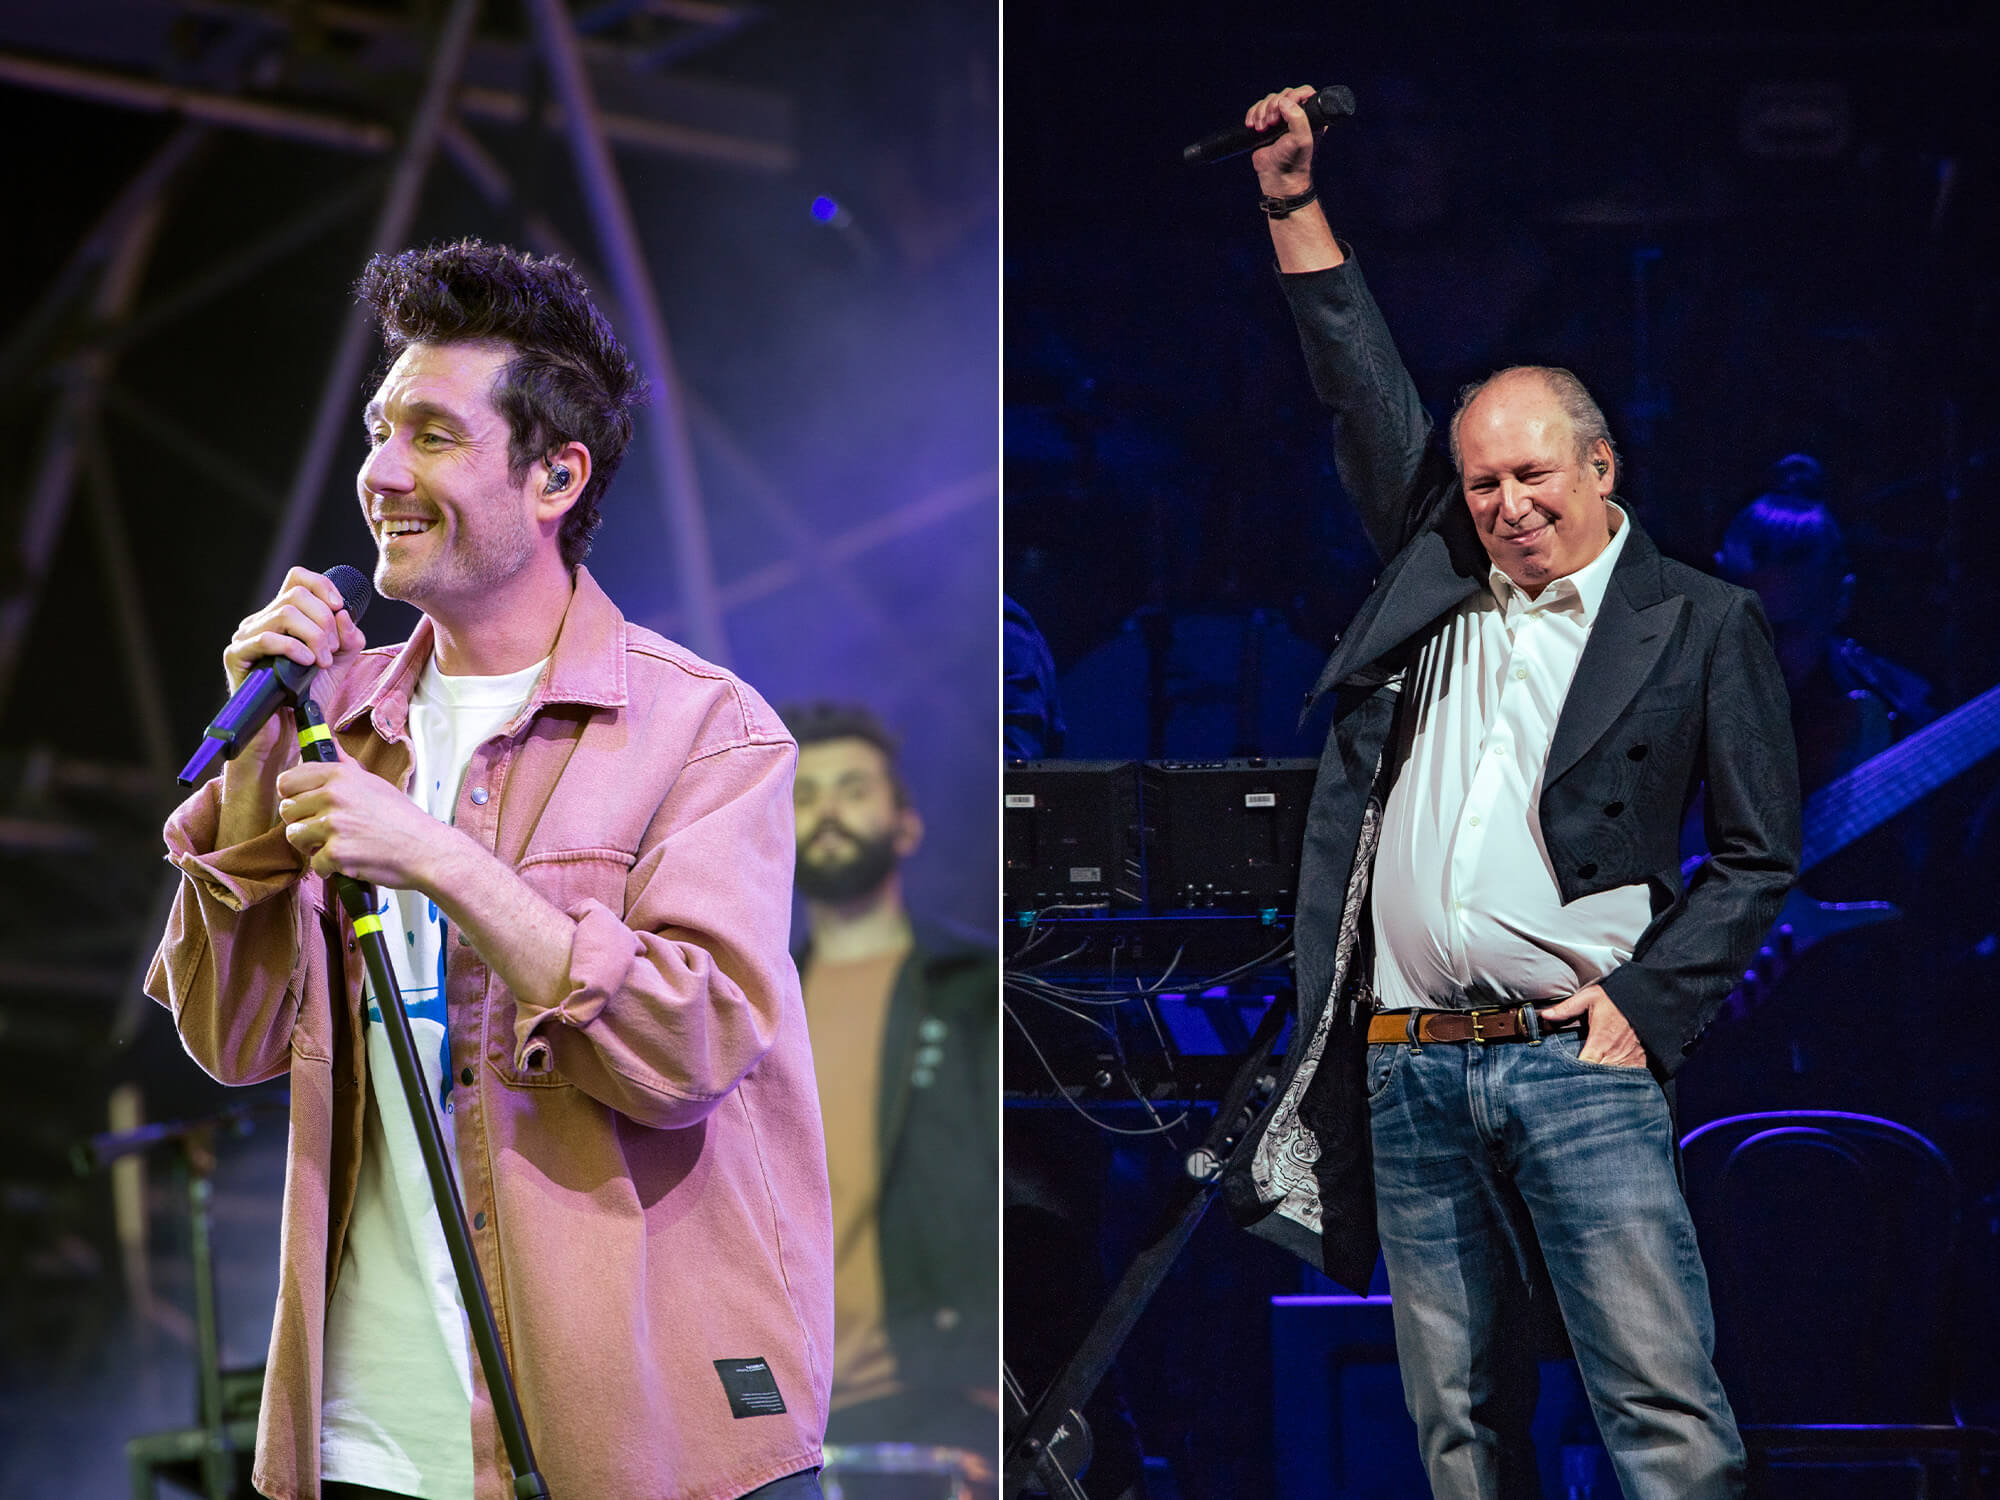 Dan Smith of Bastille (left) holding a microphone on a stand and smiling. Hans Zimmer (right) holding one hand with a mic in it to the air, with his other hand in his jean pocket. He is smiling and looking down.